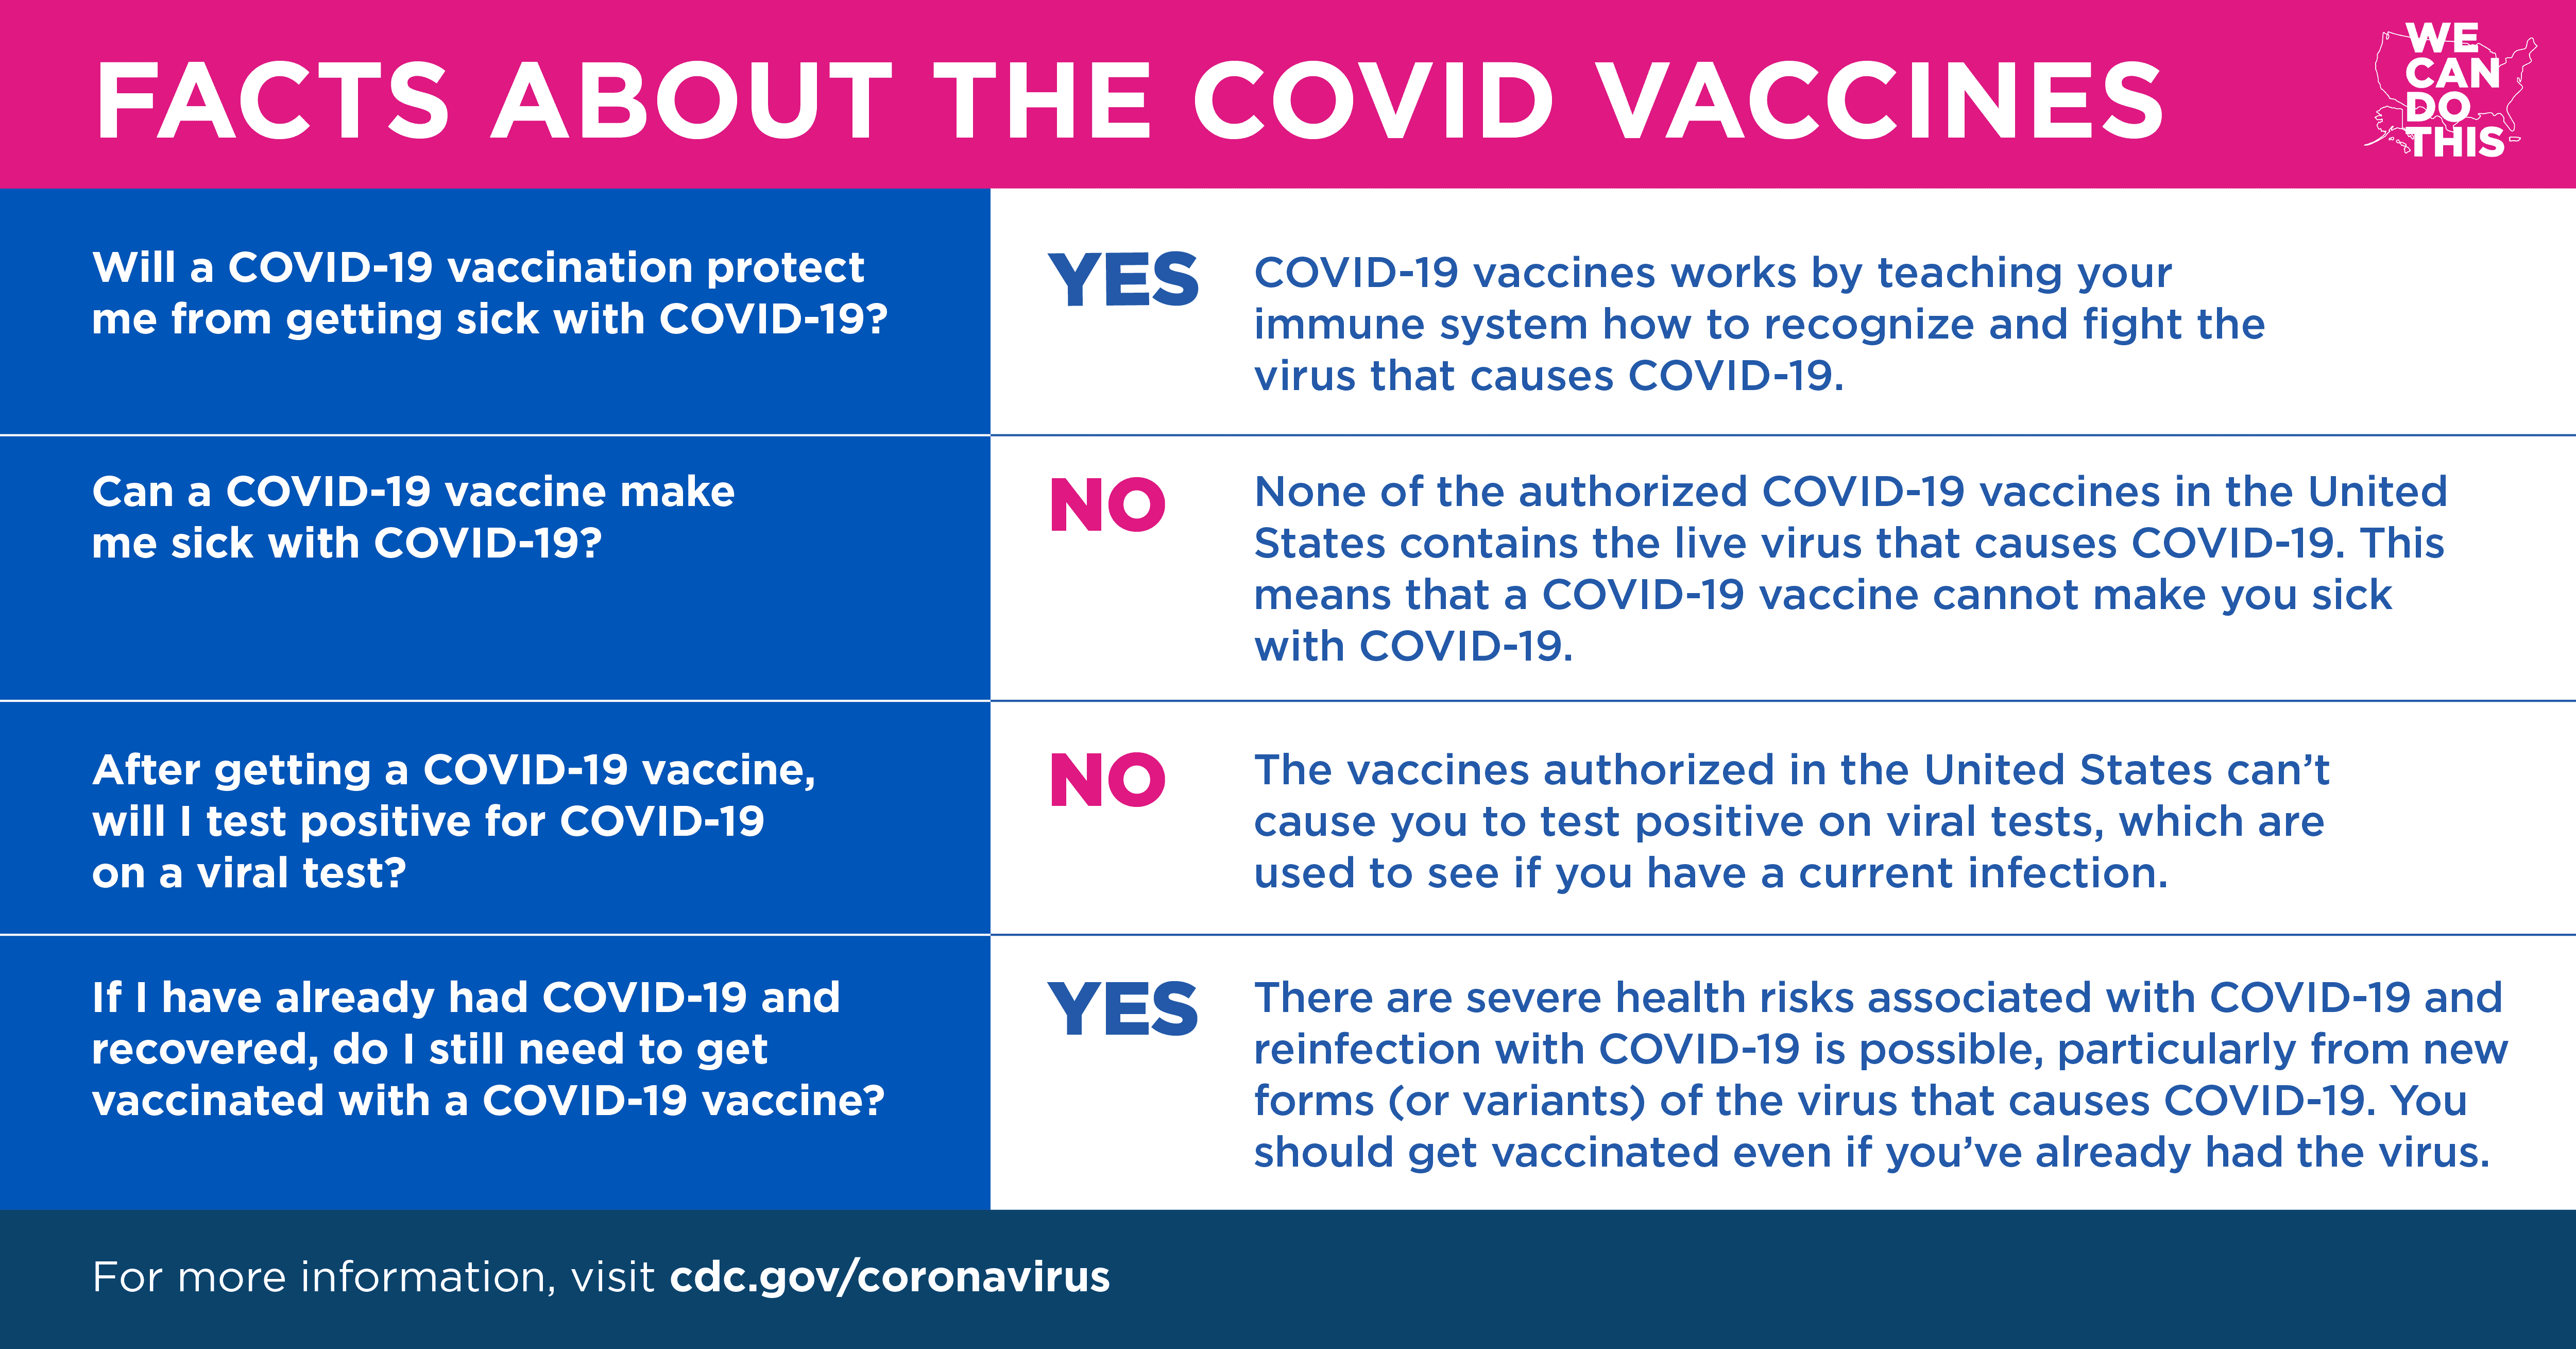 CDC graphic details facts about the vaccines.